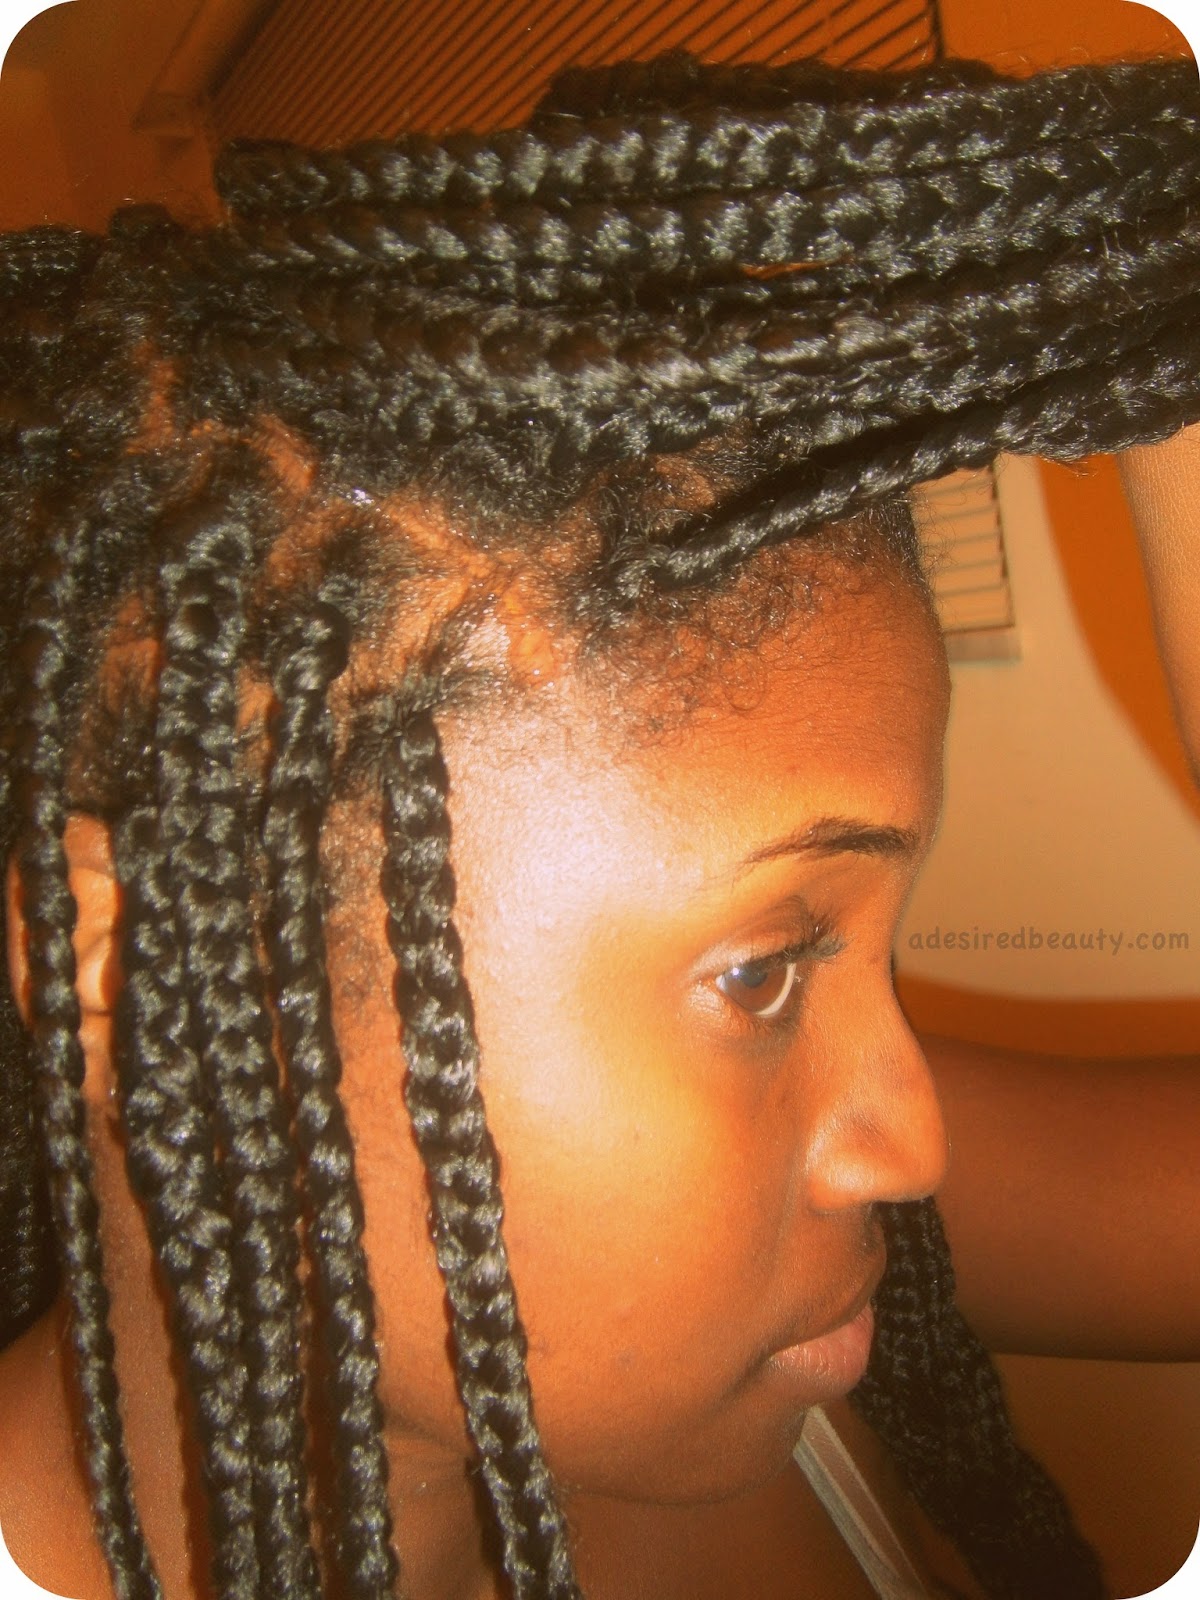 5 Tips To Relieve A Dry Itchy Or Irritated Scalp From Box Braids A Desired Beauty Scalp Braids Braids Box Braids